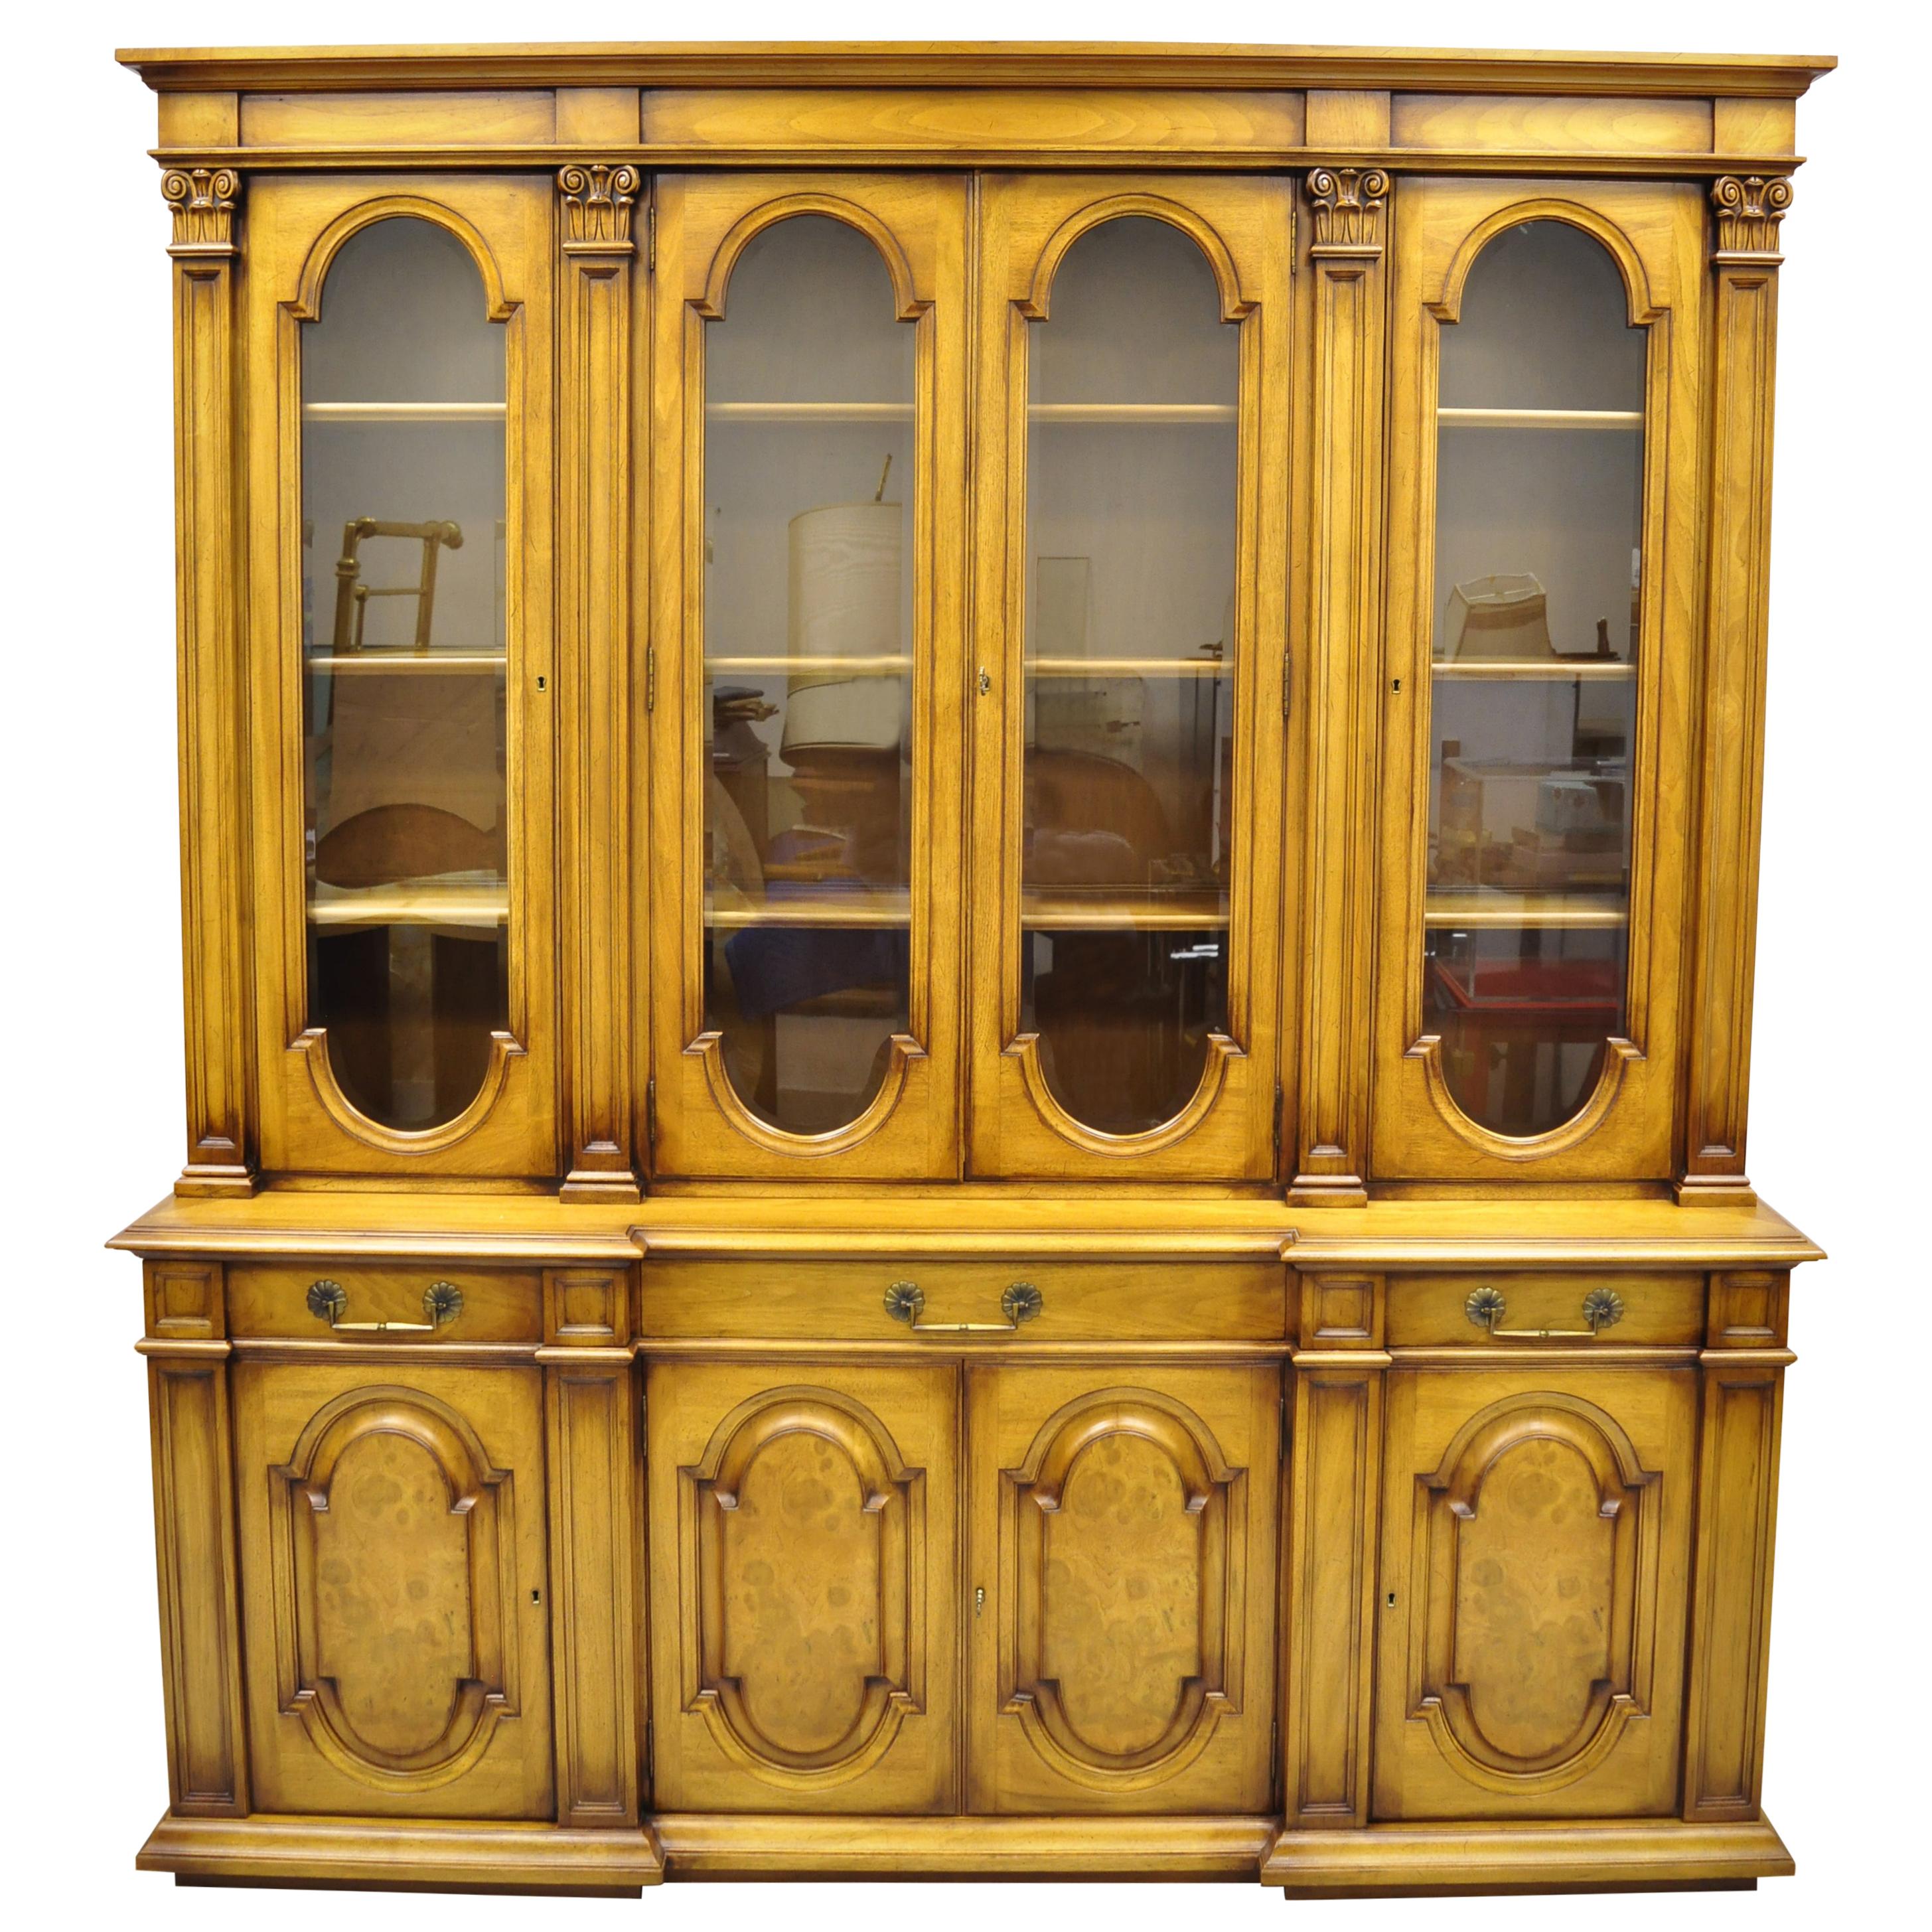 Karges Italian Provincial Large Fruitwood Burl Wood Breakfront China Cabinet